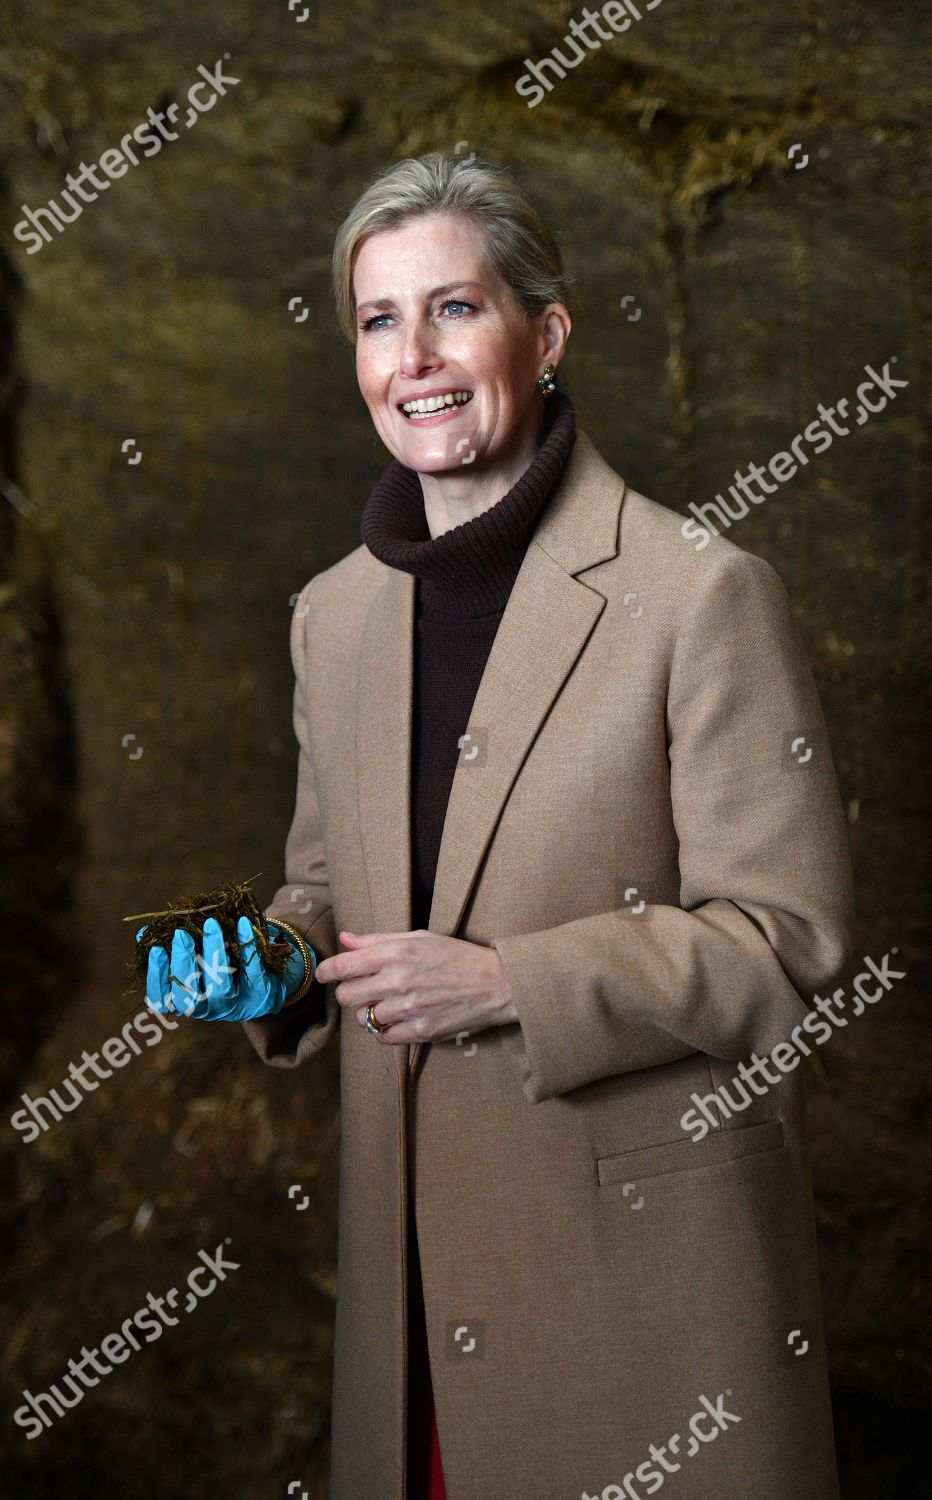 sophie-countess-of-wessex-visit-to-cumbria-shutterstock-editorial-10095439cb.jpg